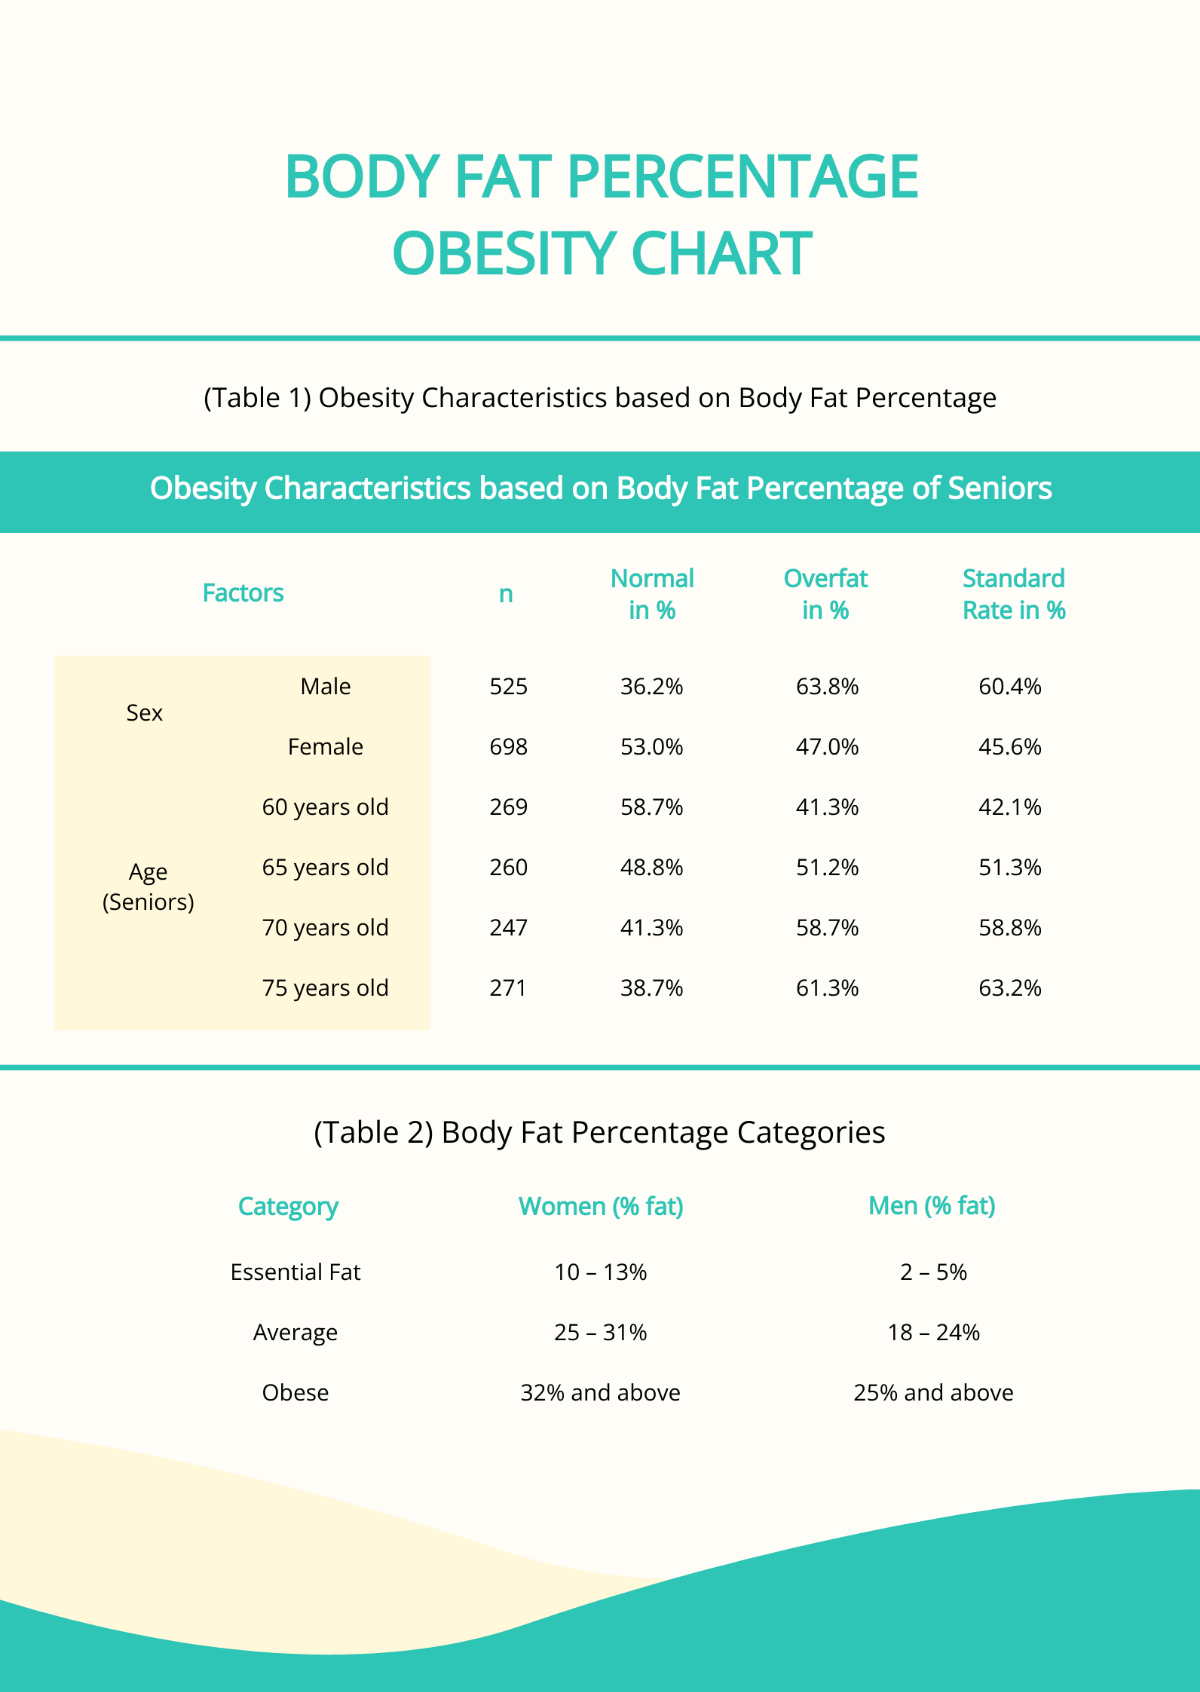 Body Fat Percentage Obesity Chart Template - Edit Online & Download ...